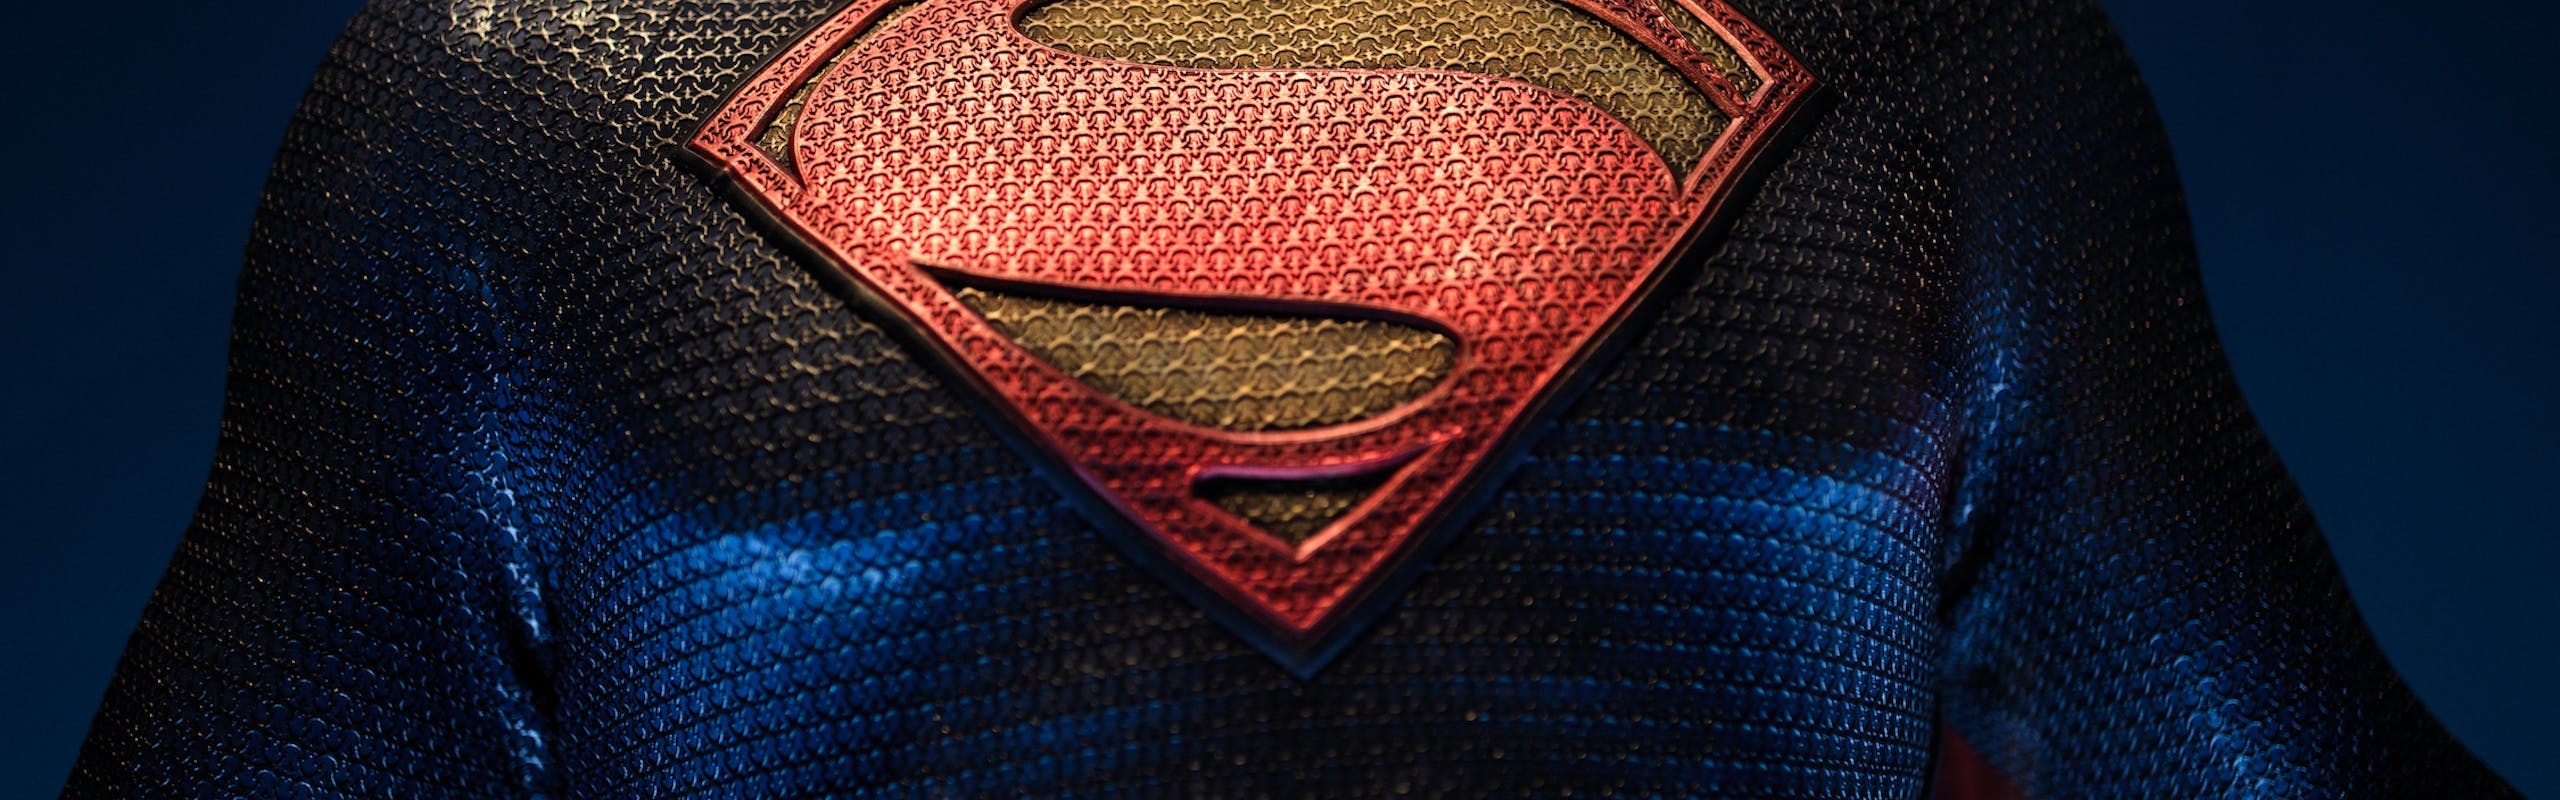 A Superman costume from the 2013 Man of Steel film.